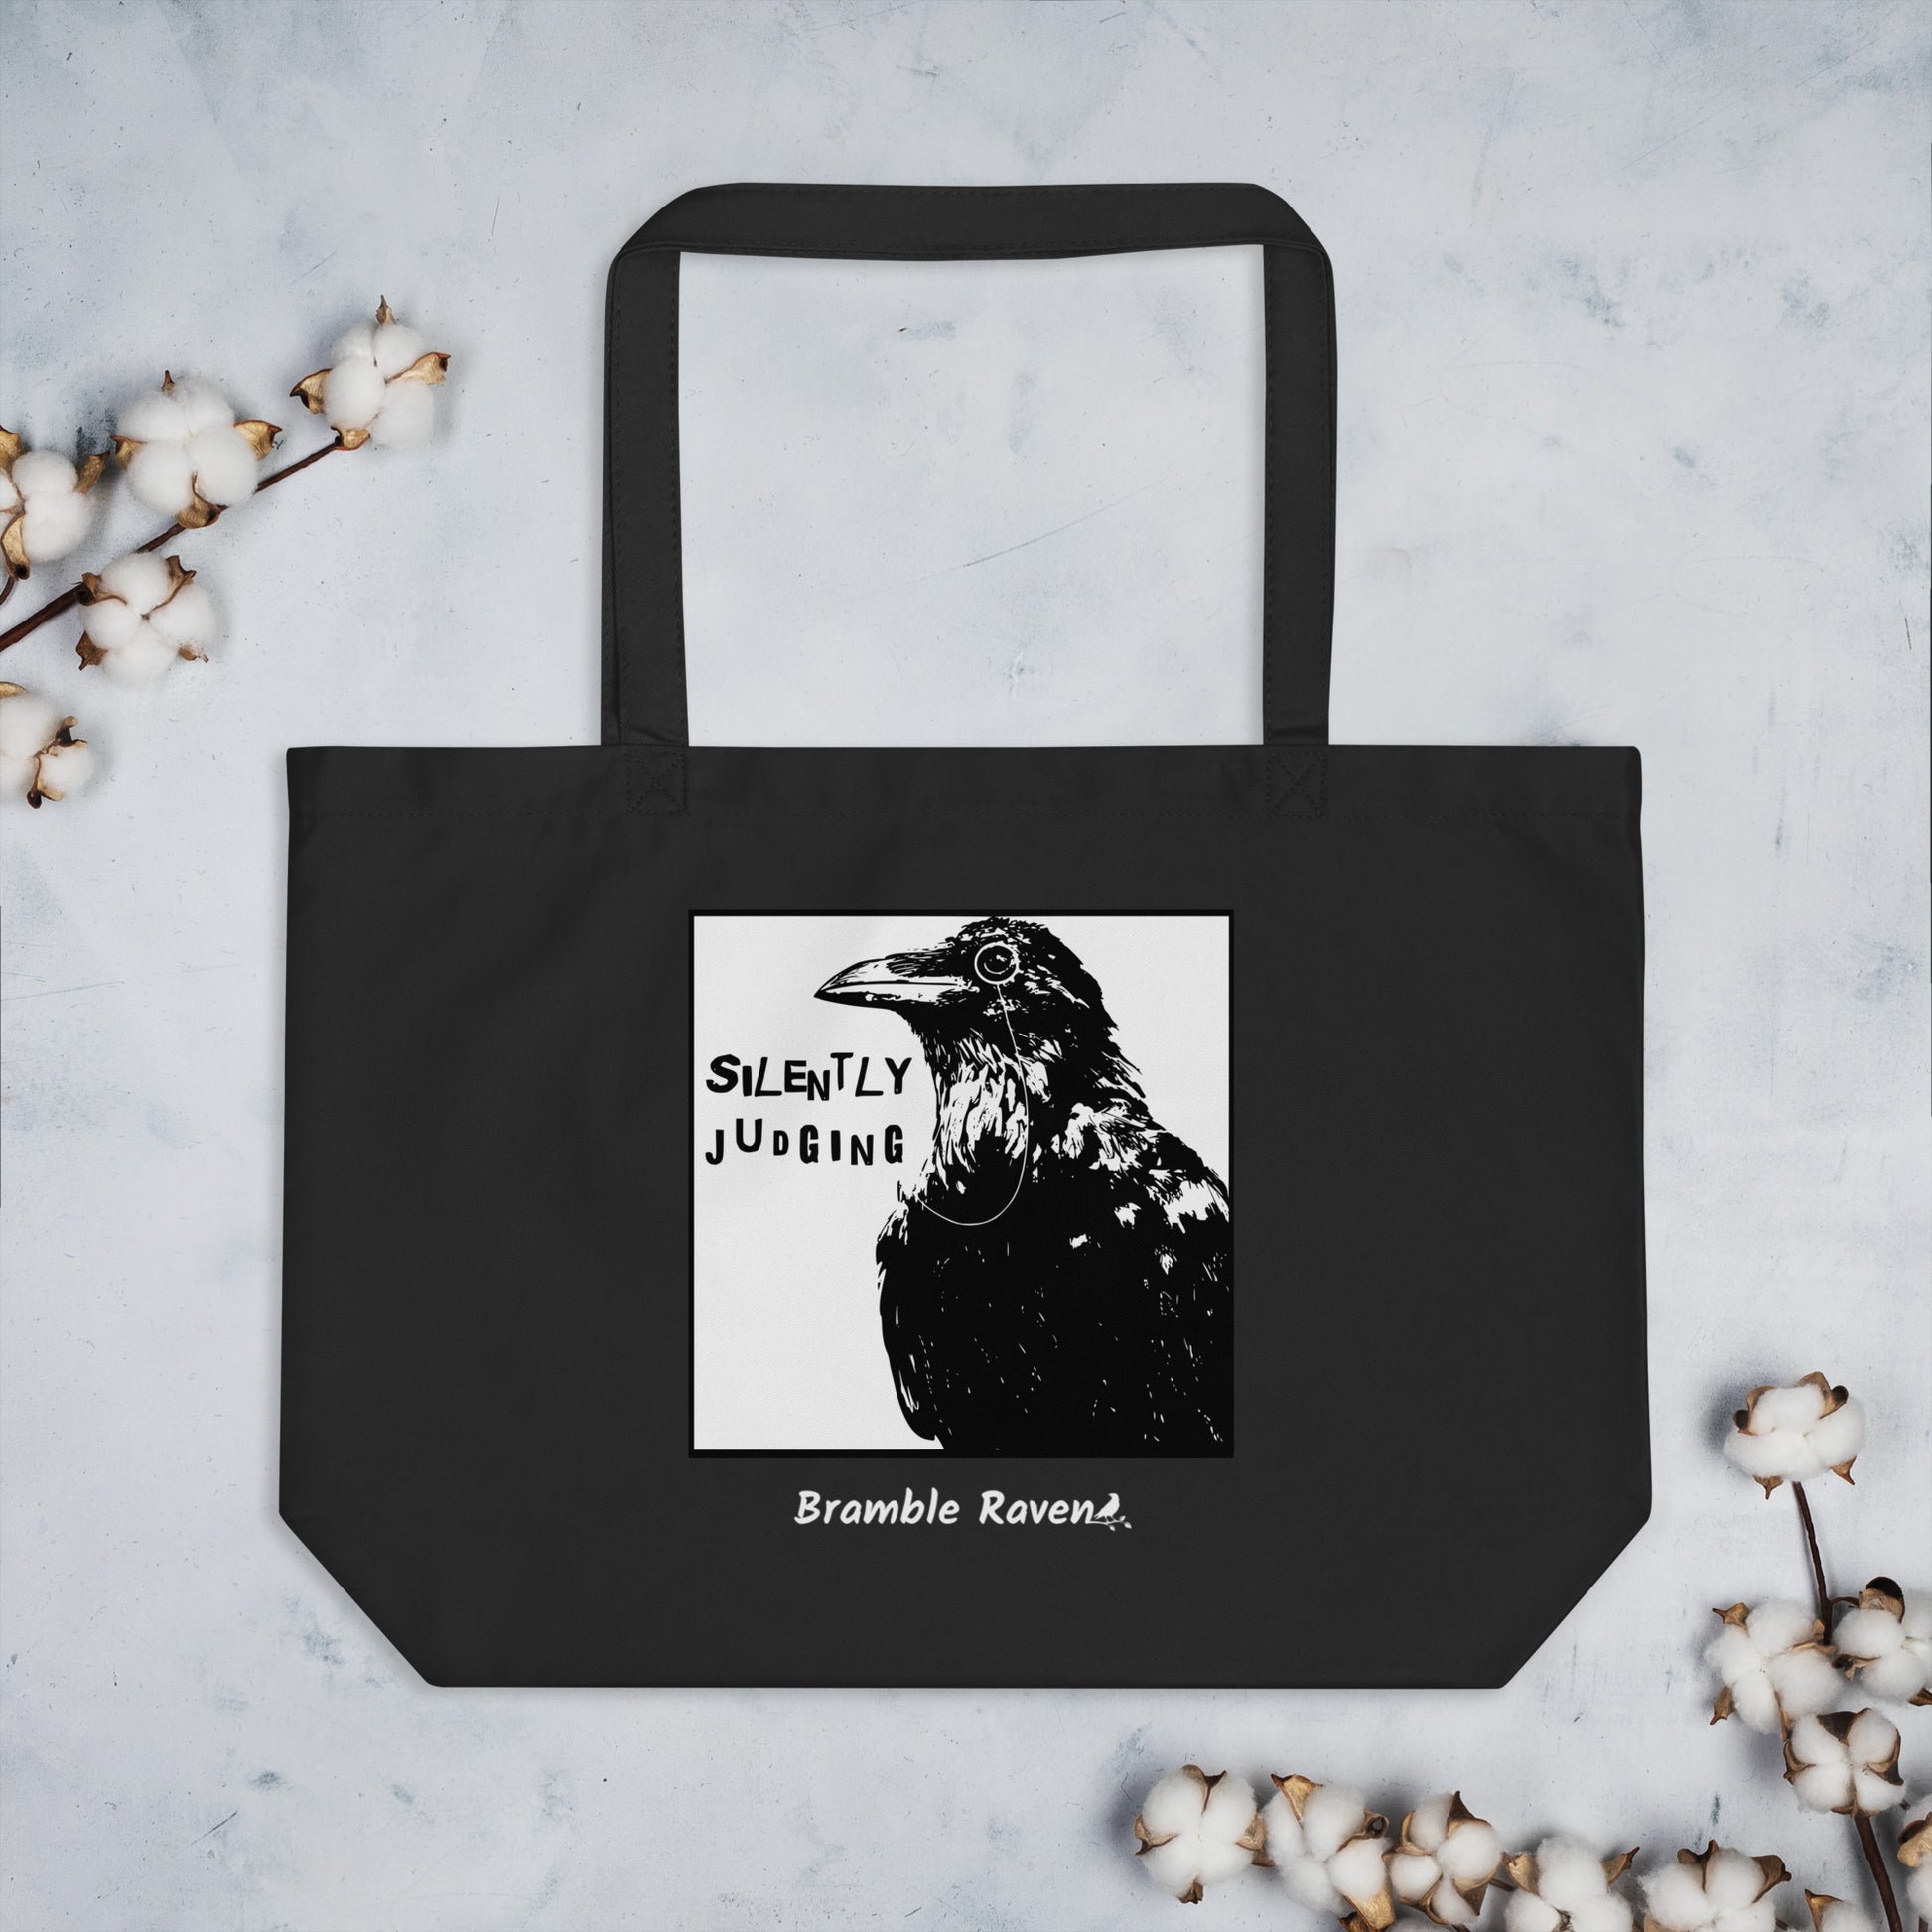 Original Silently Judging crow design. Silently Judging text. Black crow with monocle in square frame. Printed on large black colored eco tote. 20 by 14 by 5 inches. 100% recycled cotton. Shown on tabletop with cotton plant accents.